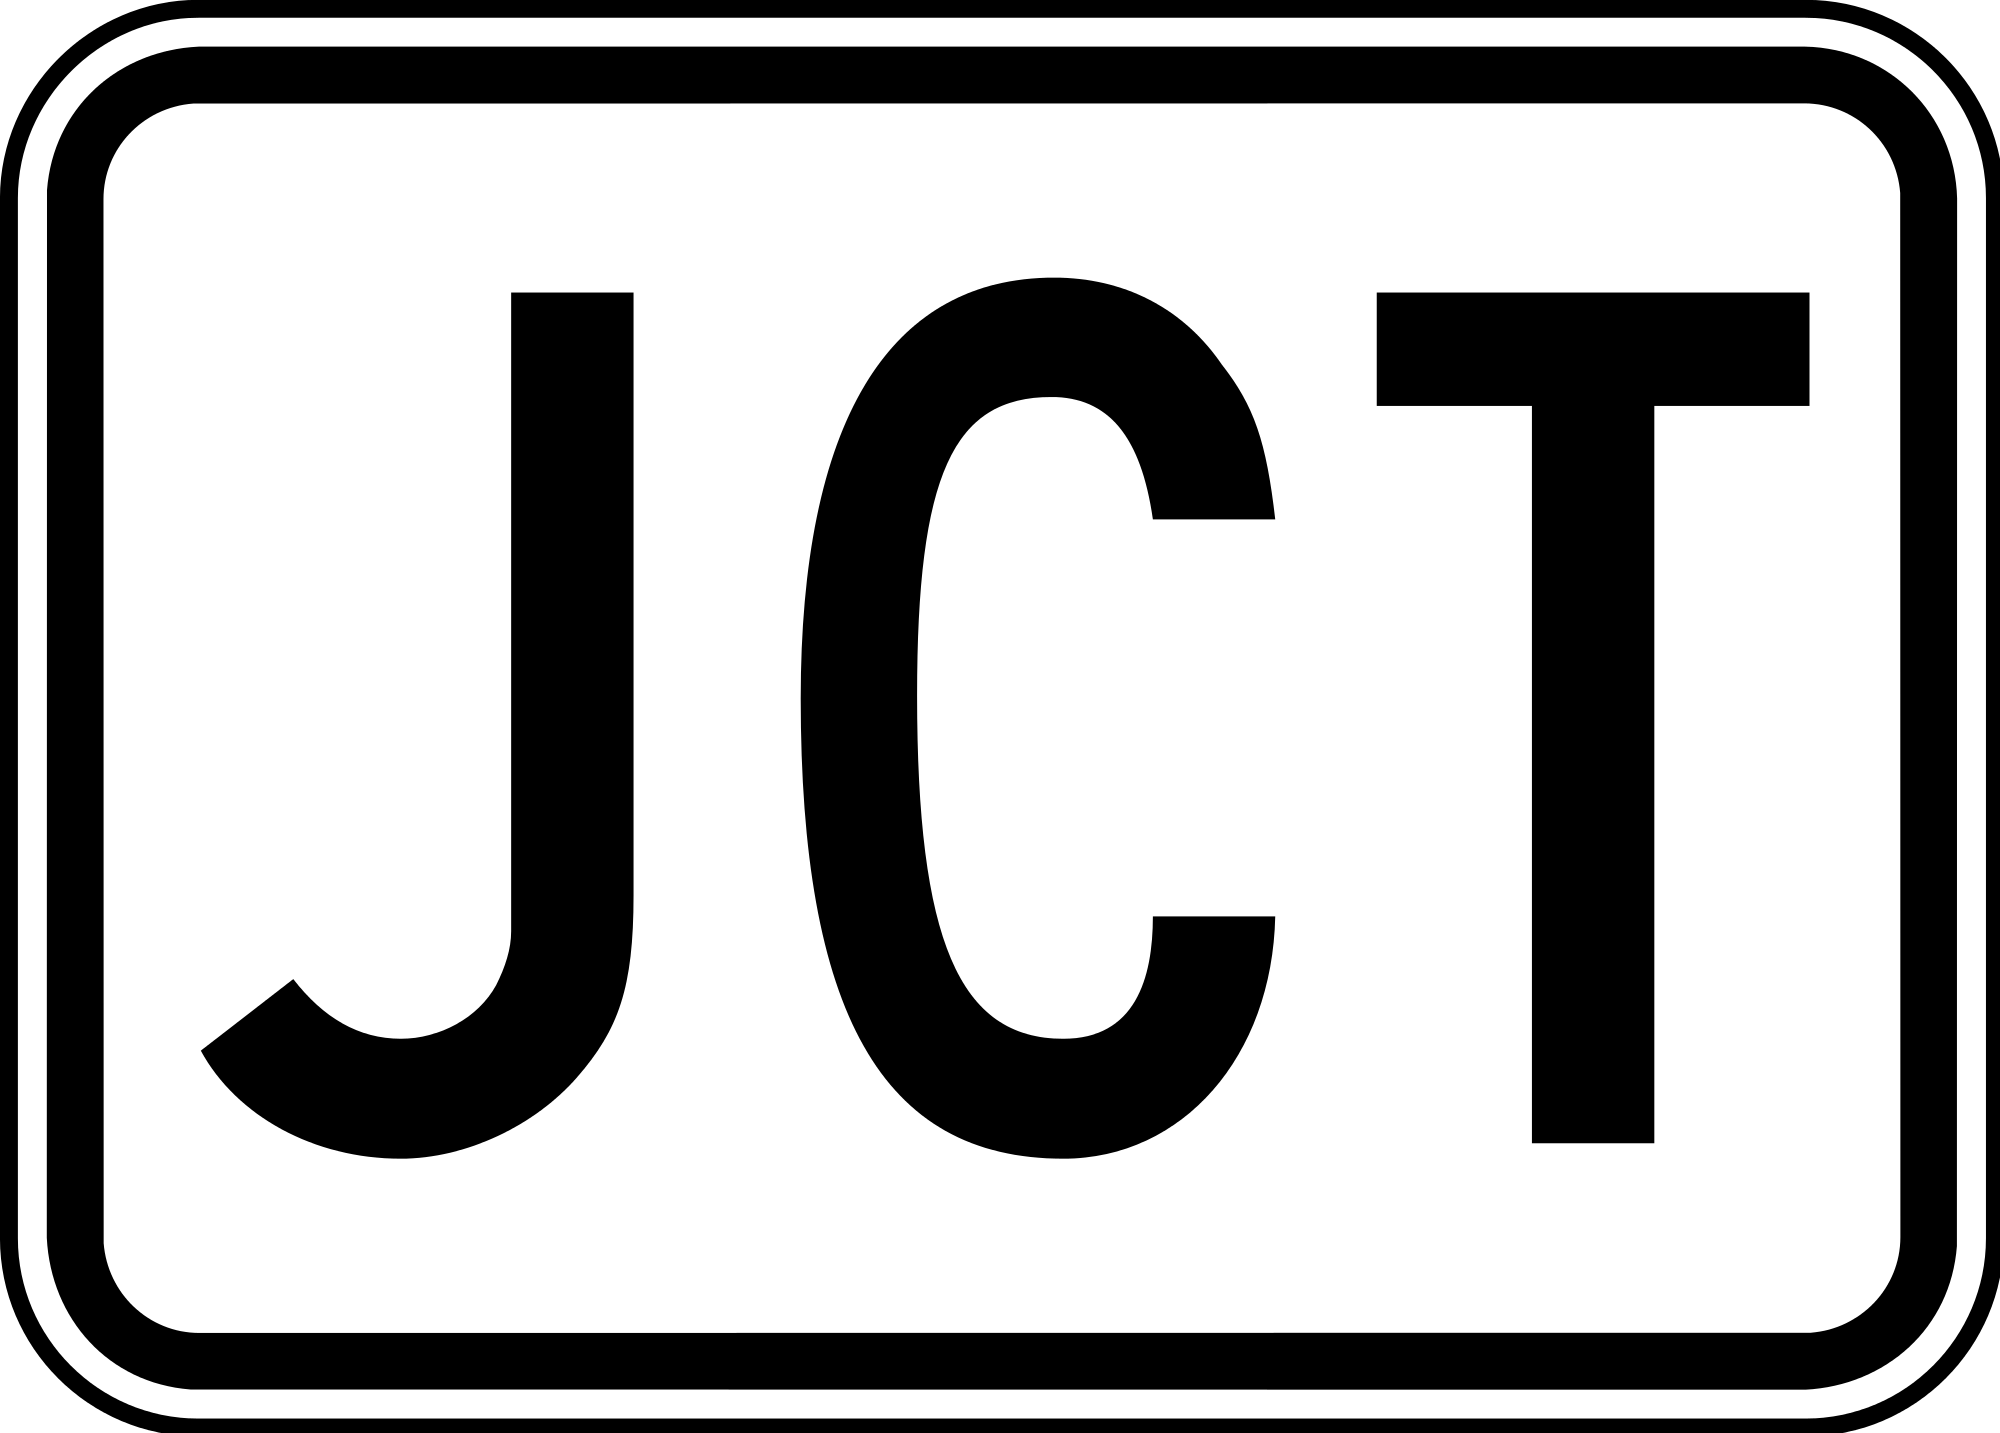 M2-1 Junction Auxiliary Guide Sign